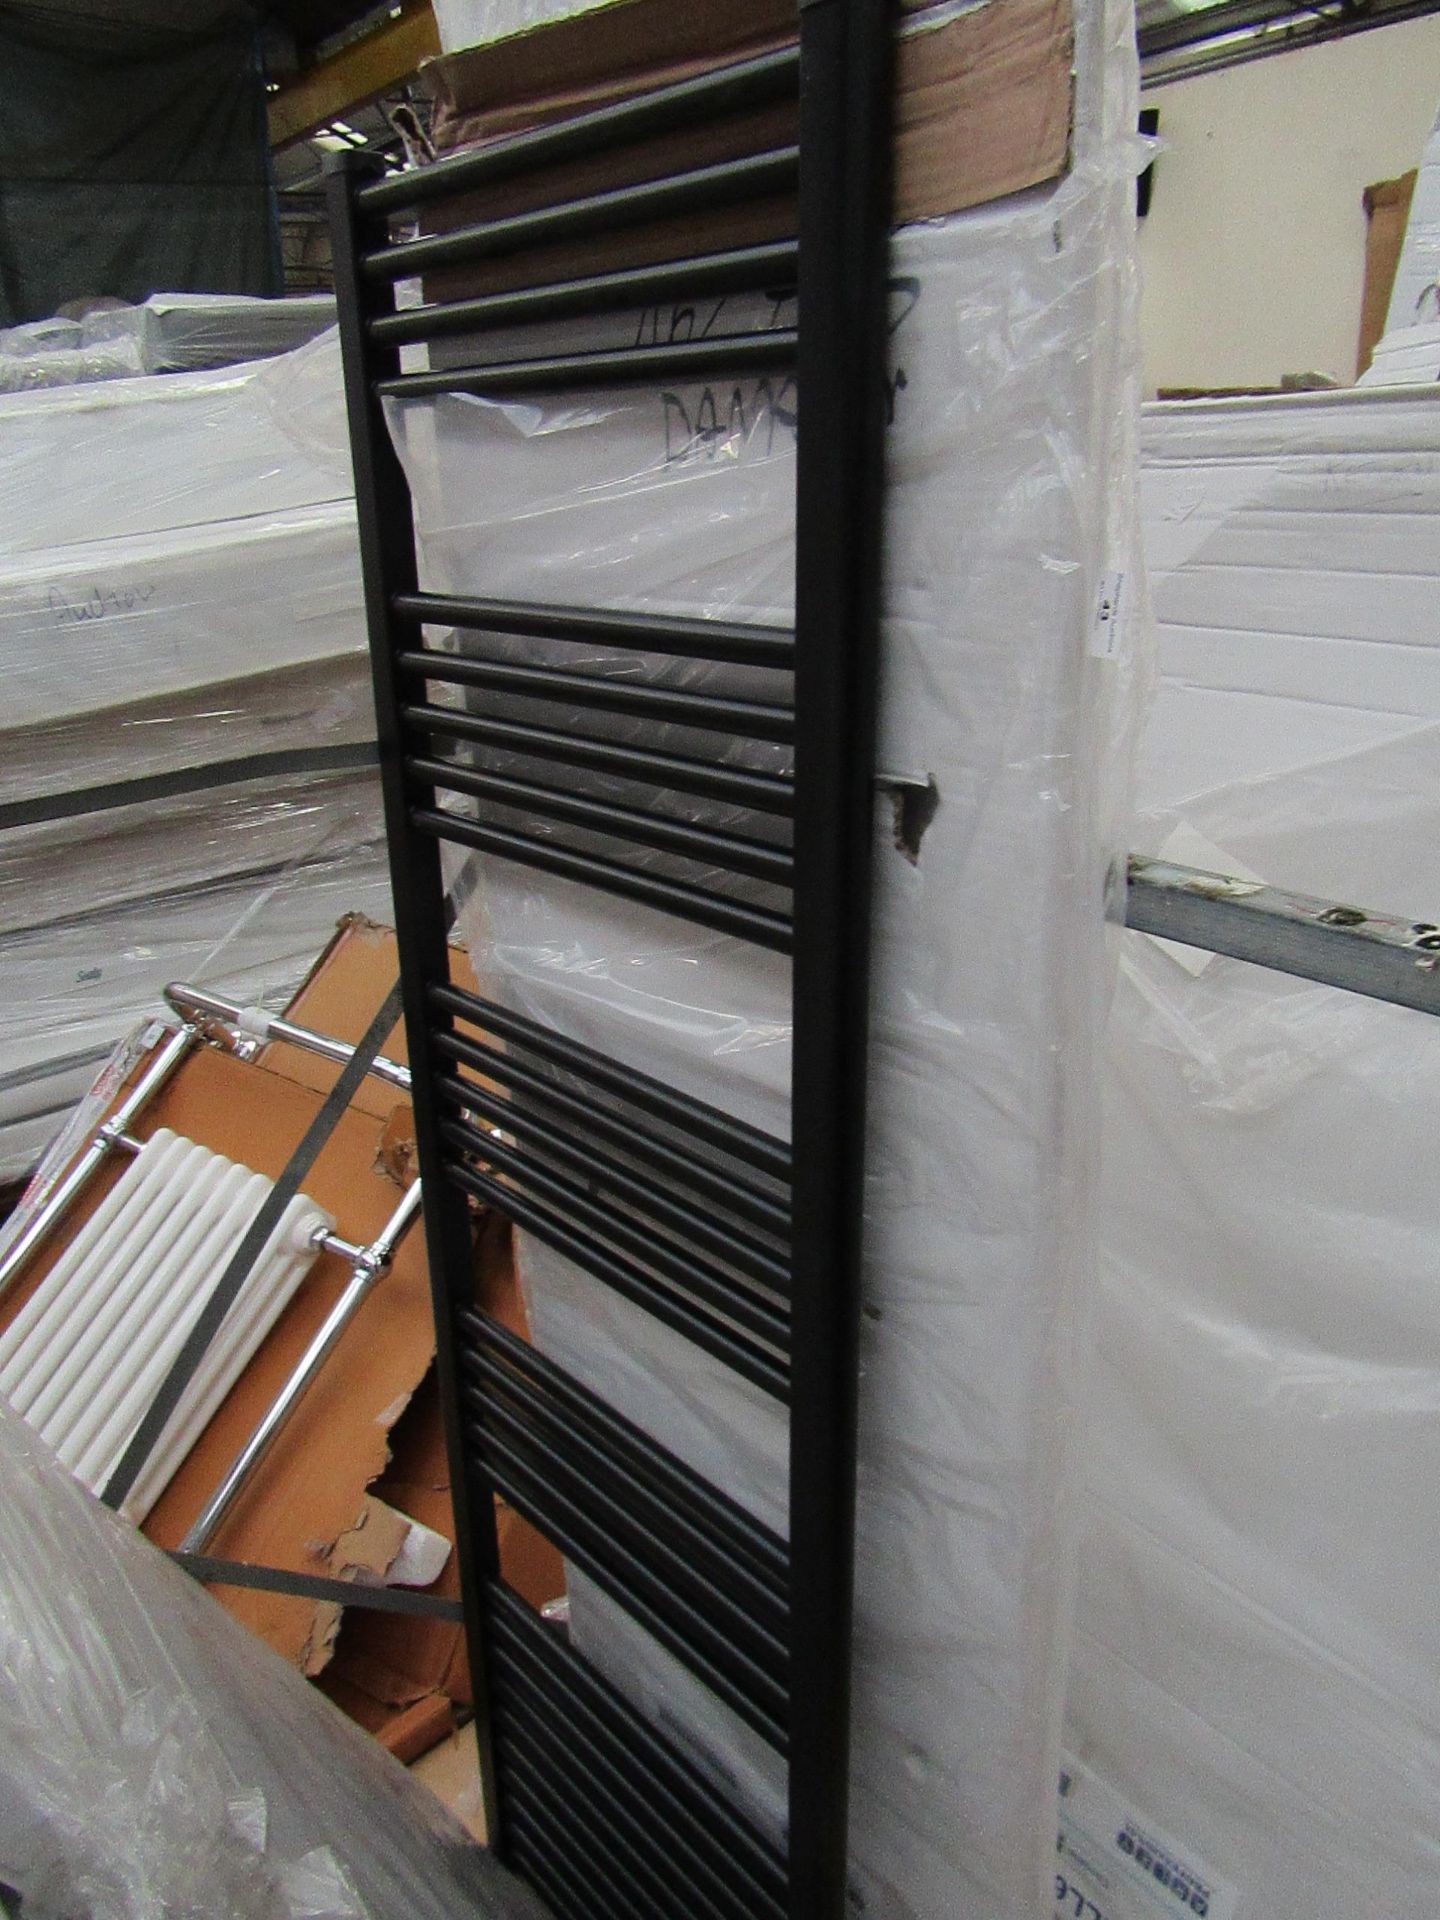 Loco straight towel radiator 500 x 1600, ex-display and boxed. Please note, this lot may contain